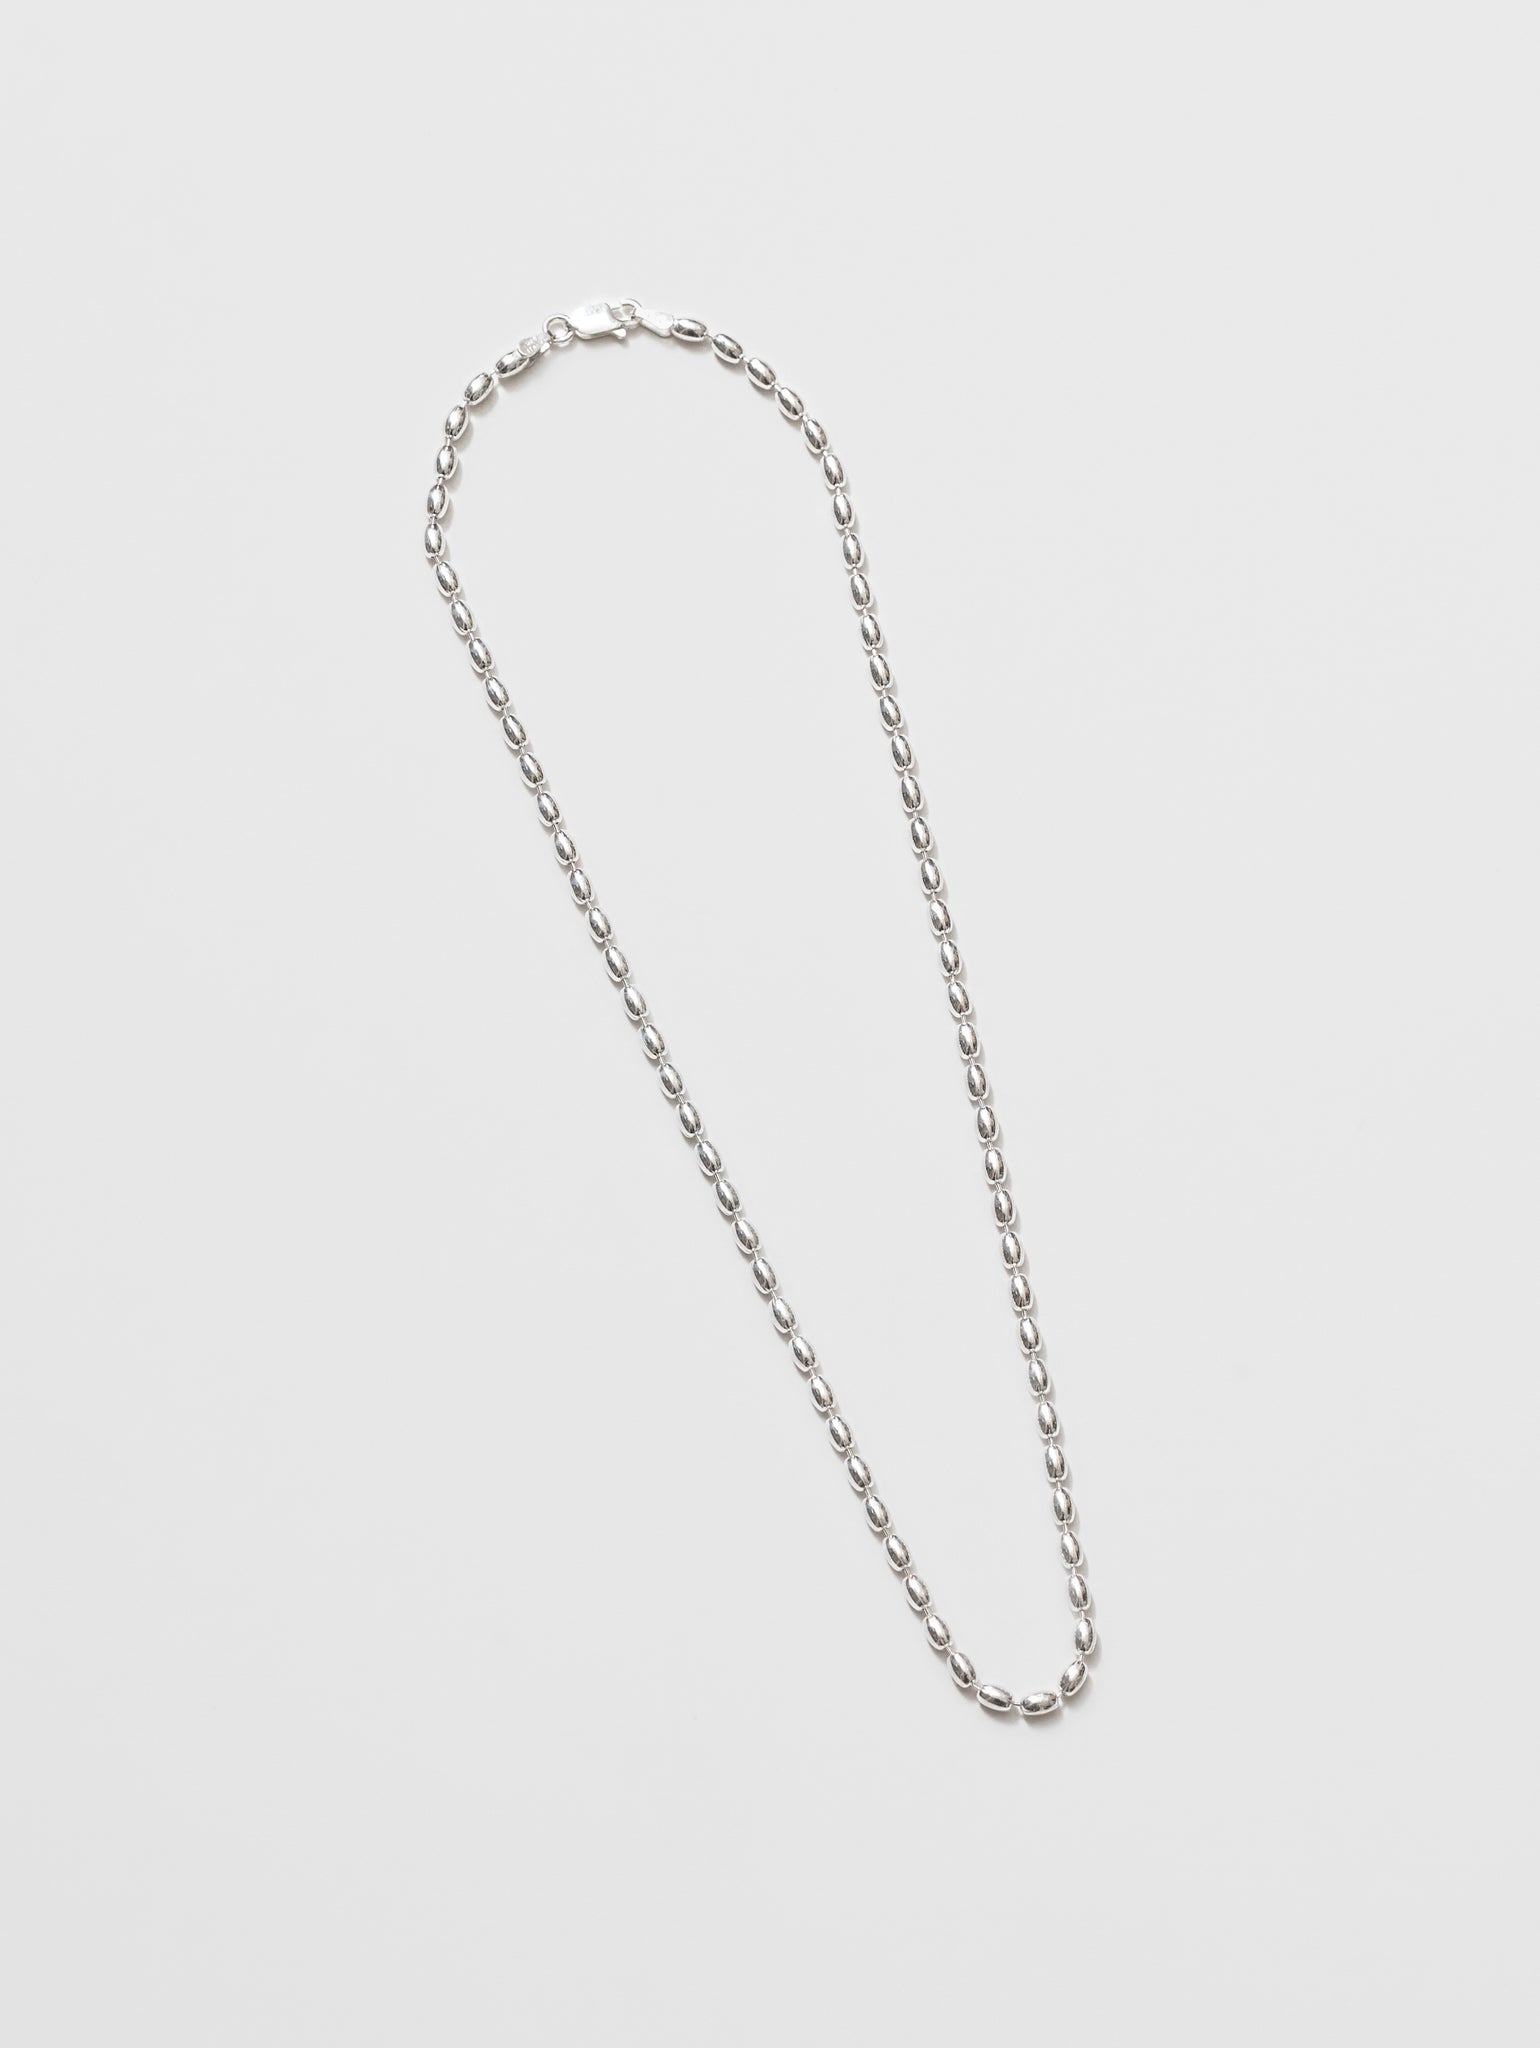 Wolf Circus Oval Bead Chain Necklace in Sterling Silver | Kai Necklace in Sterling Silver-Necklaces-wolfcircus.com